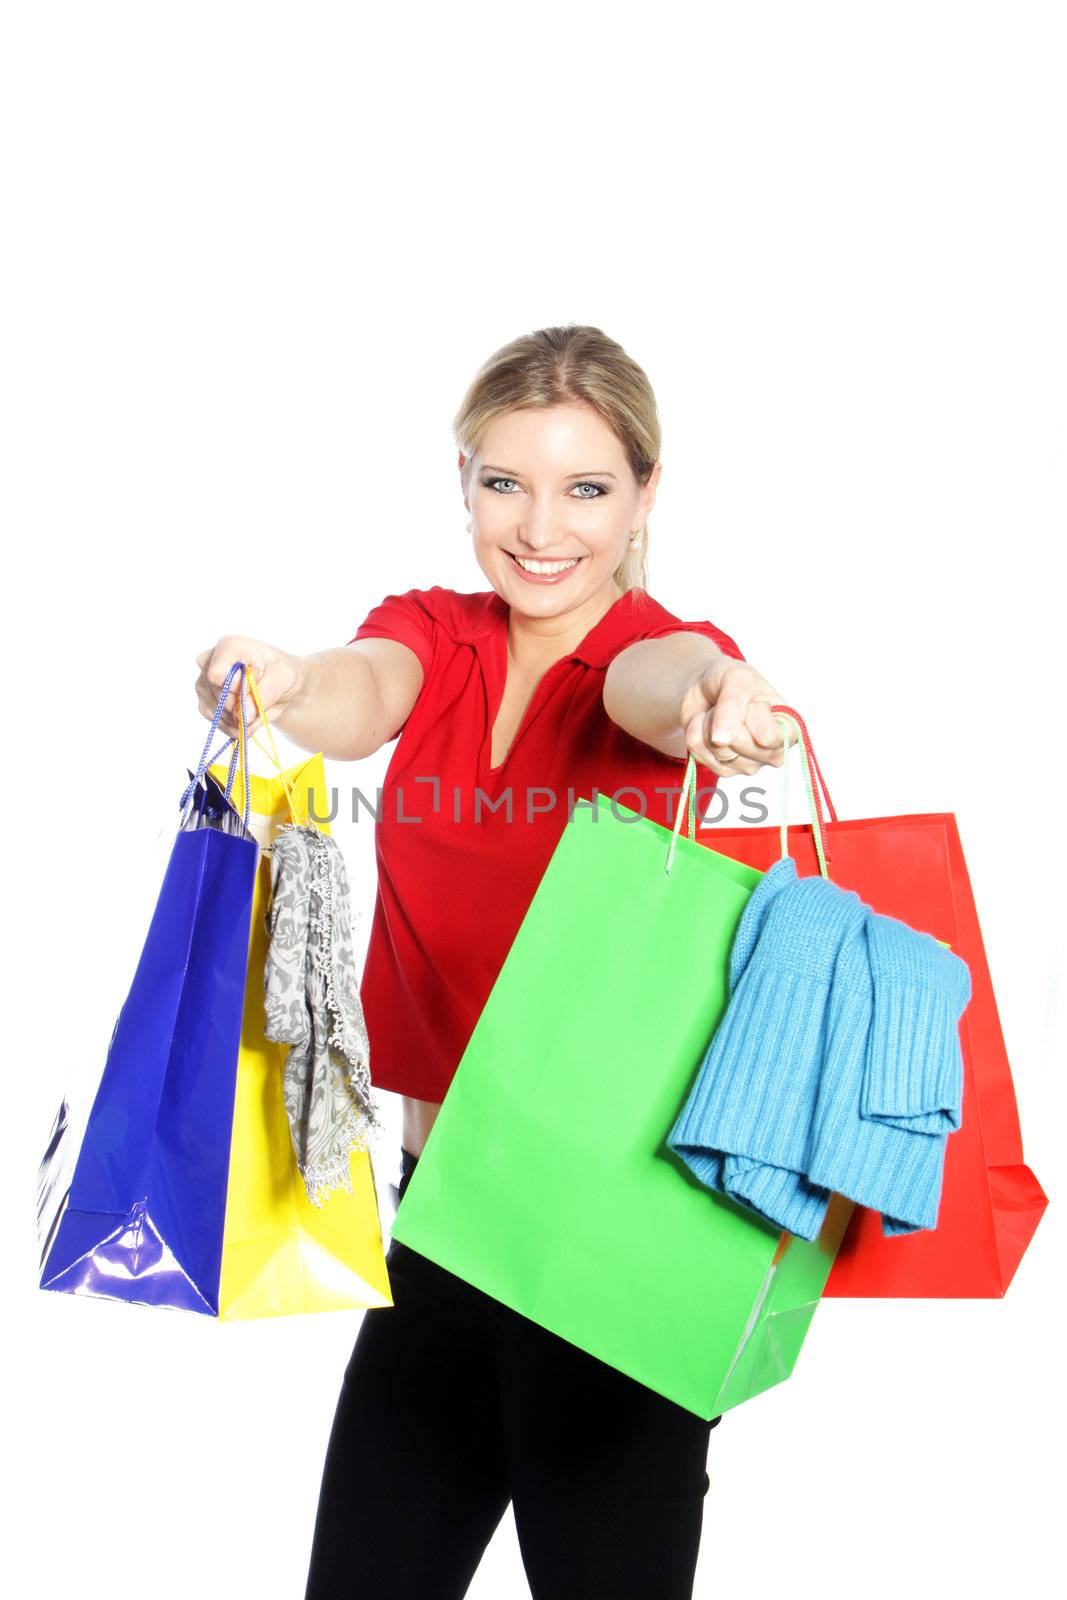 Happy woman shopping for clothing by Farina6000